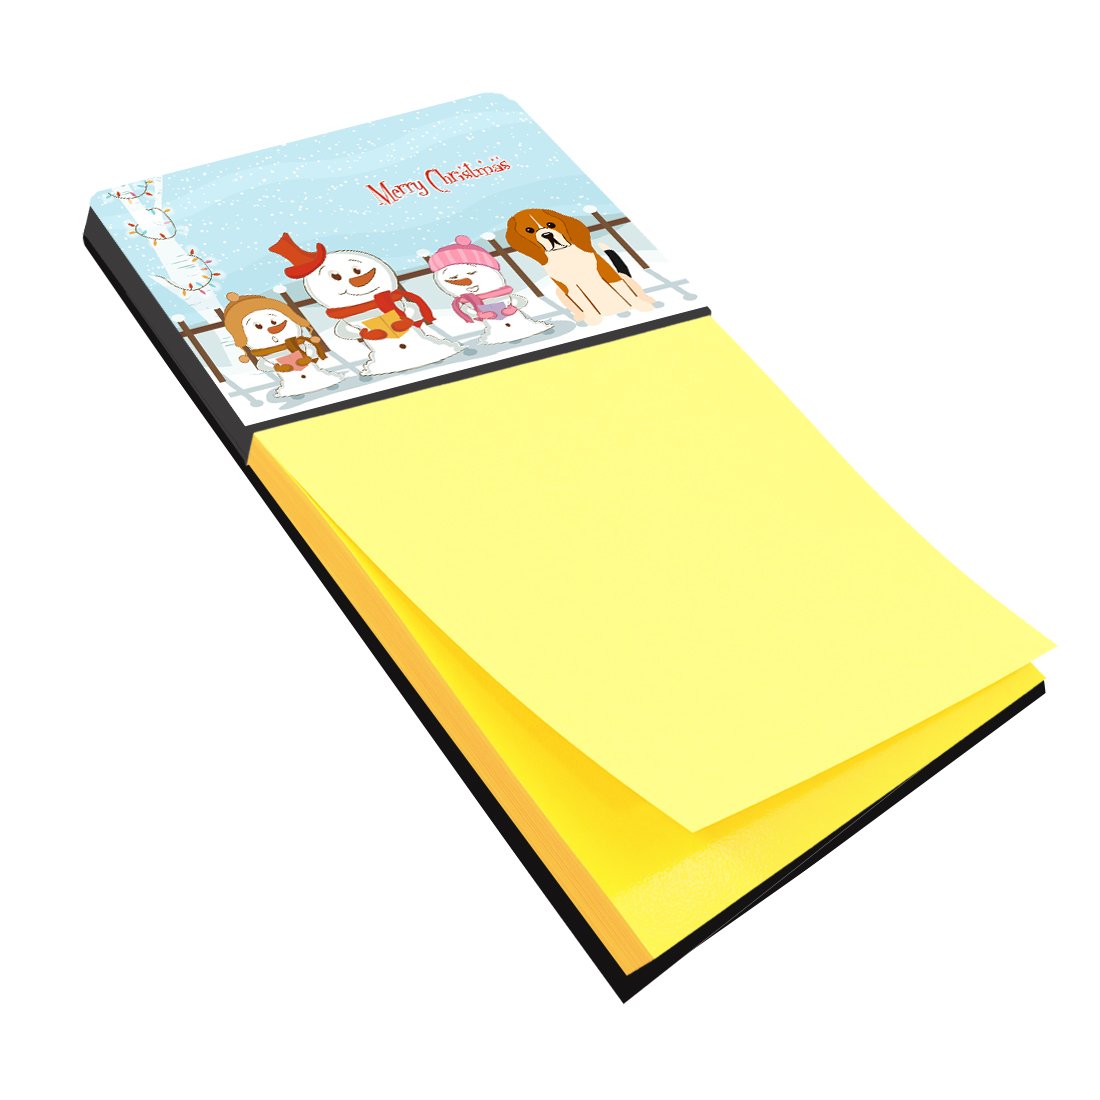 Merry Christmas Carolers Beagle Tricolor Sticky Note Holder BB2371SN by Caroline's Treasures